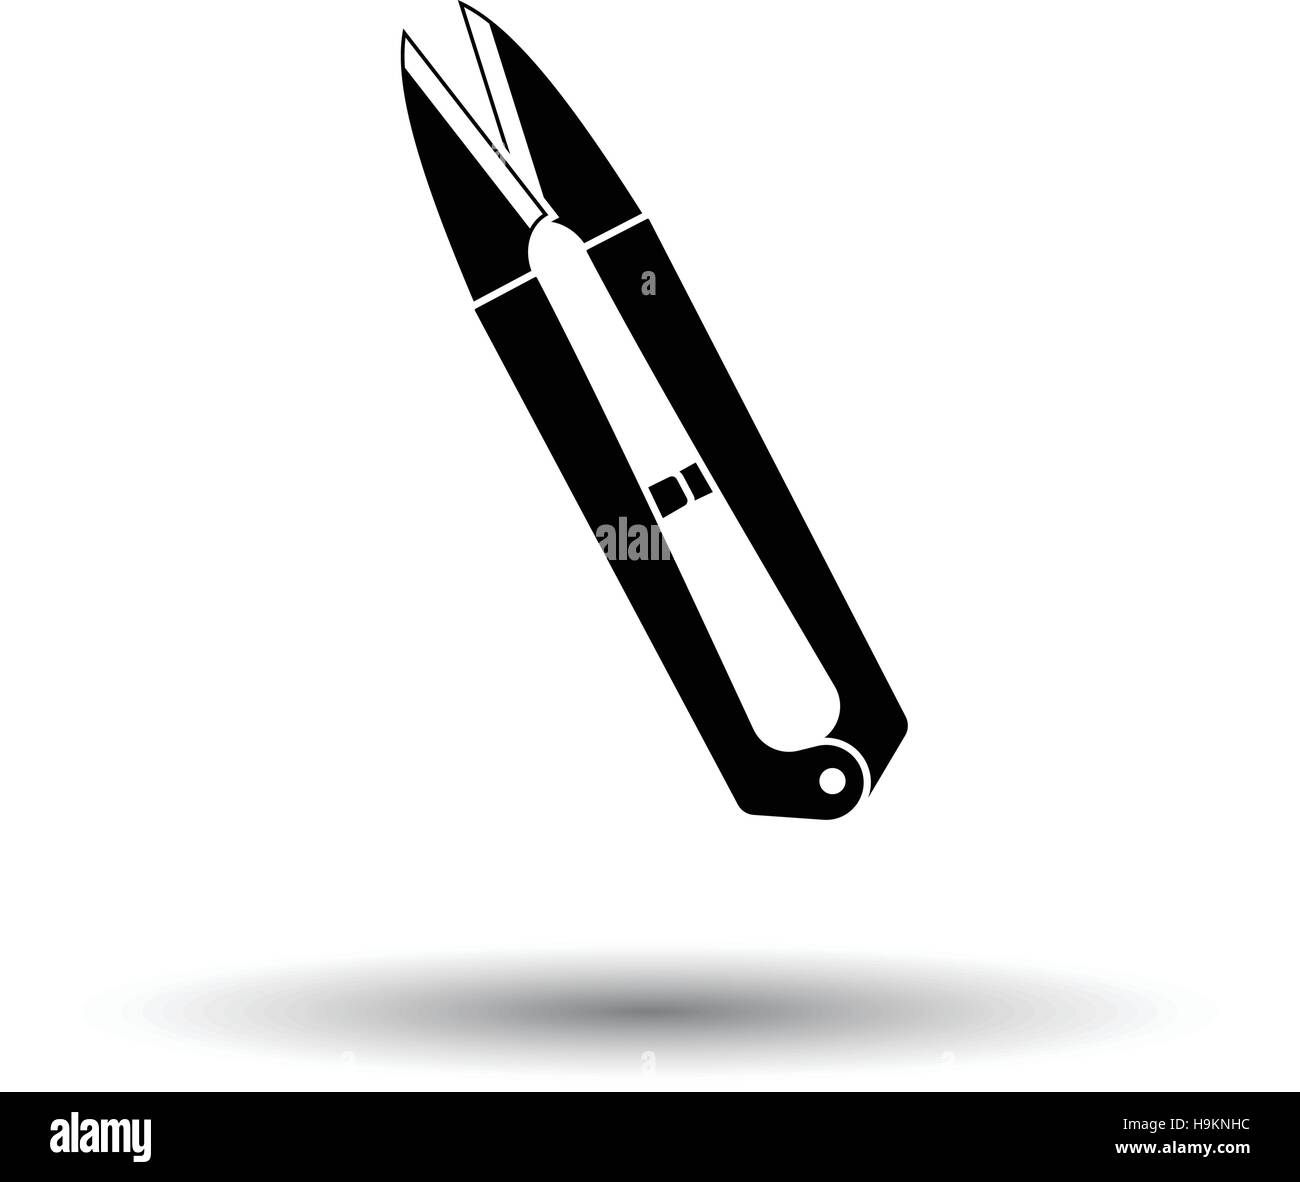 https://c8.alamy.com/comp/H9KNHC/seam-ripper-icon-white-background-with-shadow-design-vector-illustration-H9KNHC.jpg